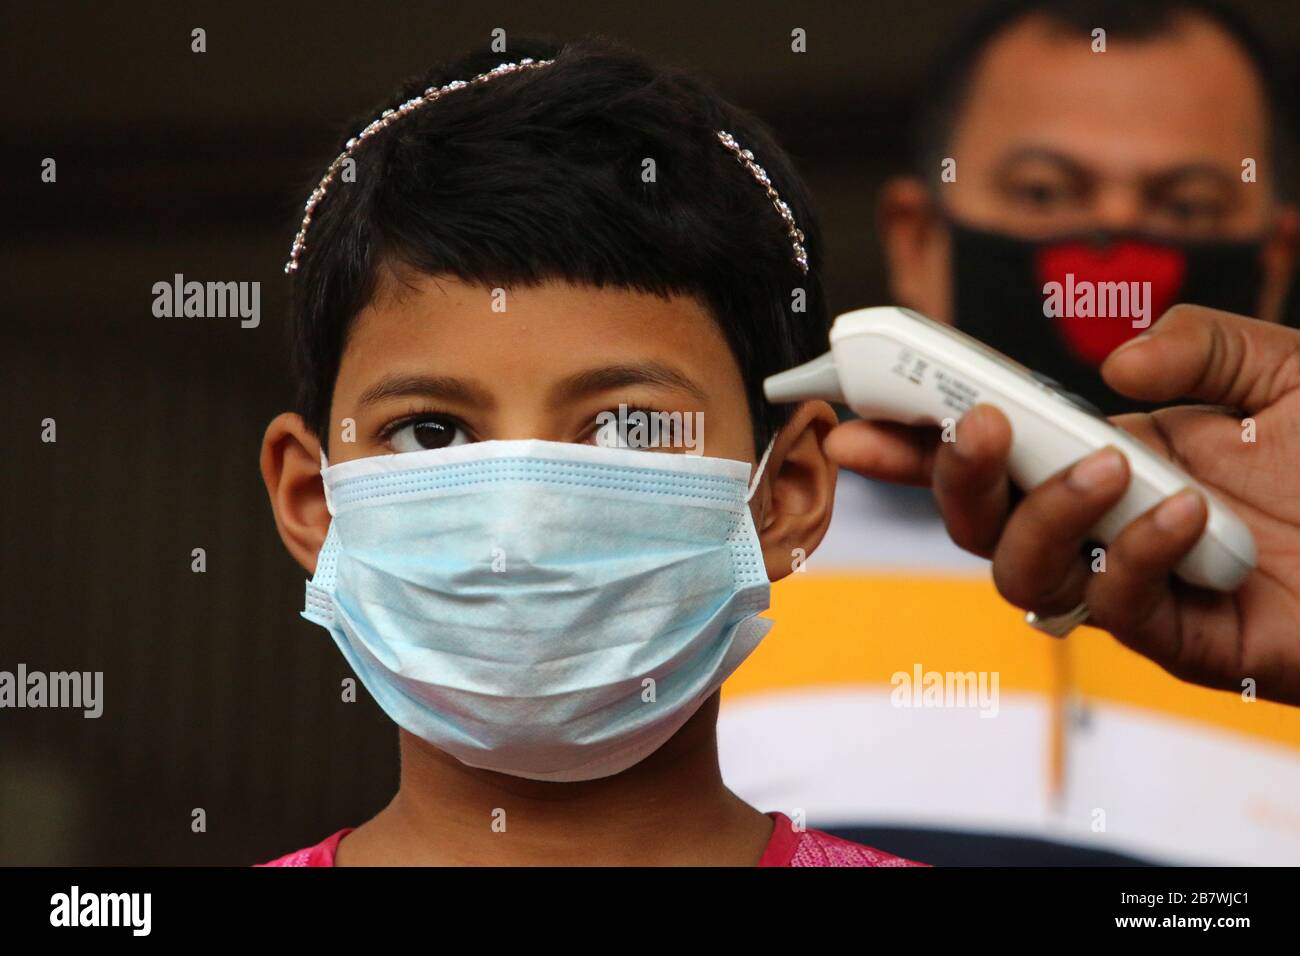 Dhaka, Bangladesh. 18th Mar, 2020. Thermal screening of passengers is being conducted in the wake of deadly coronavirus, at Dhaka Railway Station.Bangladesh has recorded its first death from coronavirus, which has killed over 7,800 people from across the world in a global pandemic. Institute of Epidemiology, Disease Control and Research (IEDCR) added that four new cases of Covid-19 have been confirmed, taking the total number of confirmed coronavirus patients in Bangladesh to 14. Credit: SOPA Images Limited/Alamy Live News Stock Photo